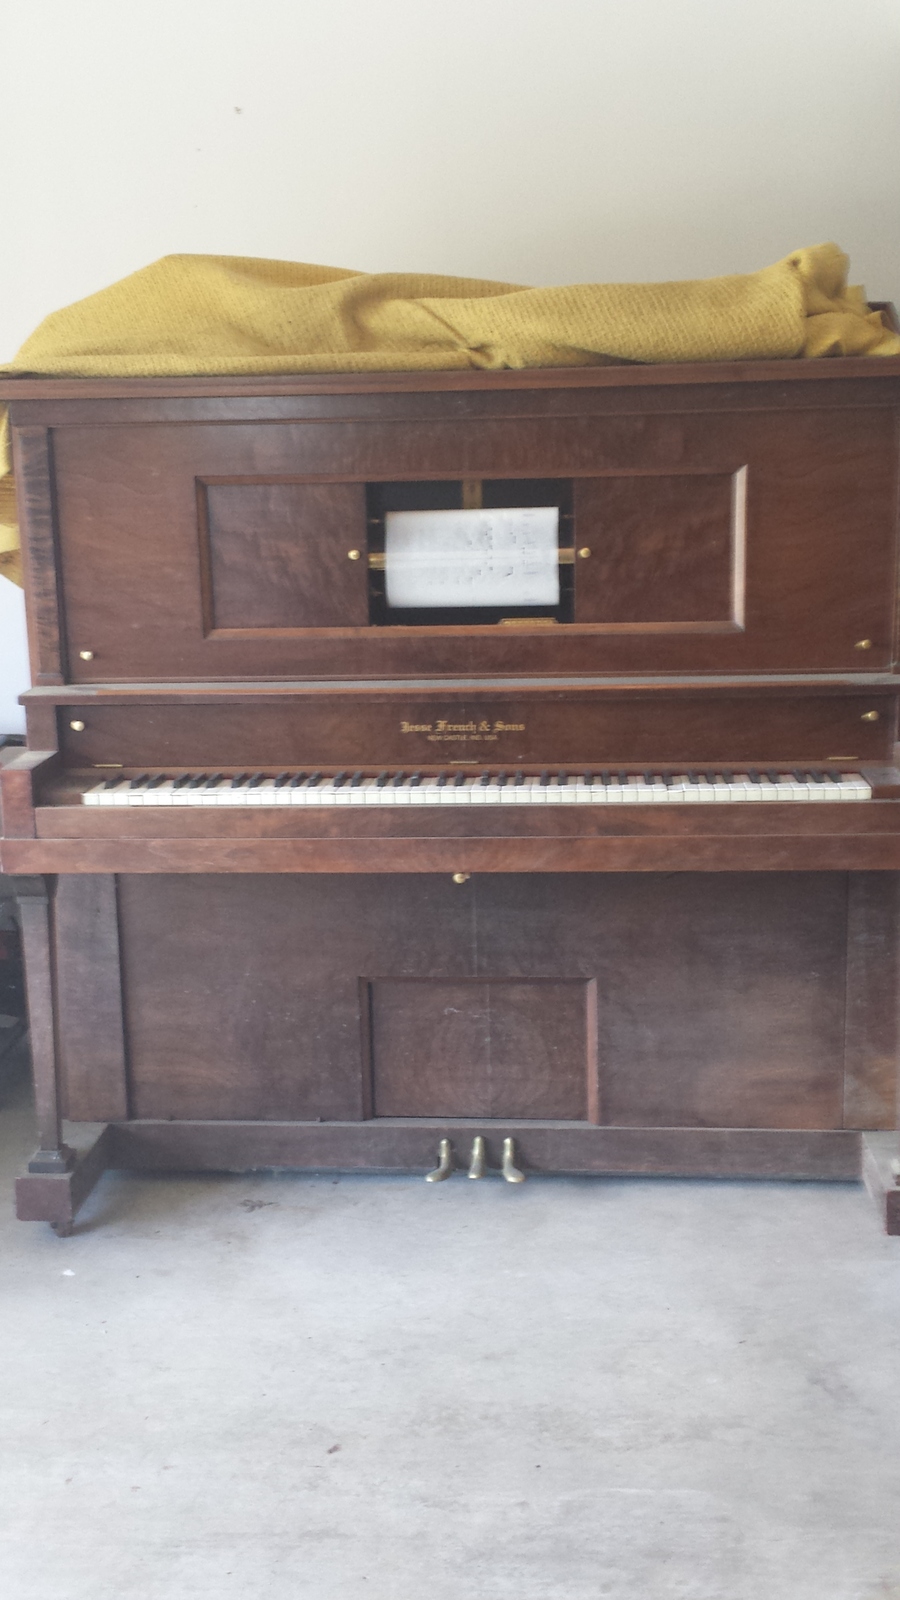 weber piano serial numbers